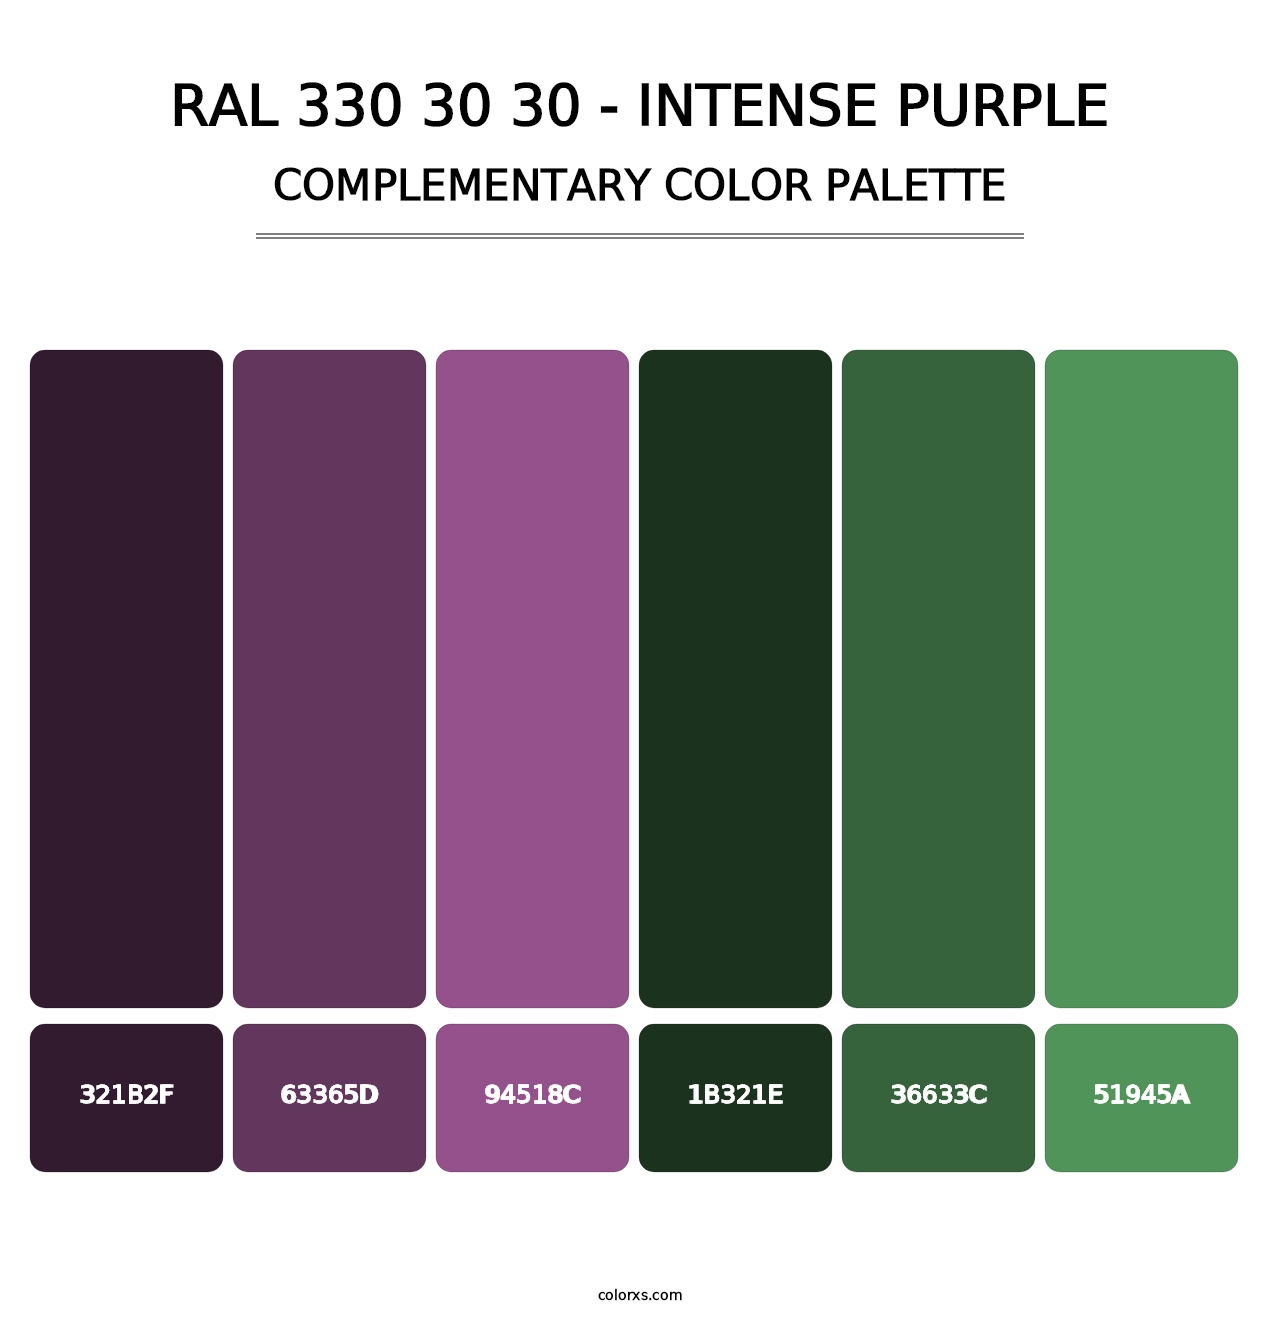 RAL 330 30 30 - Intense Purple - Complementary Color Palette